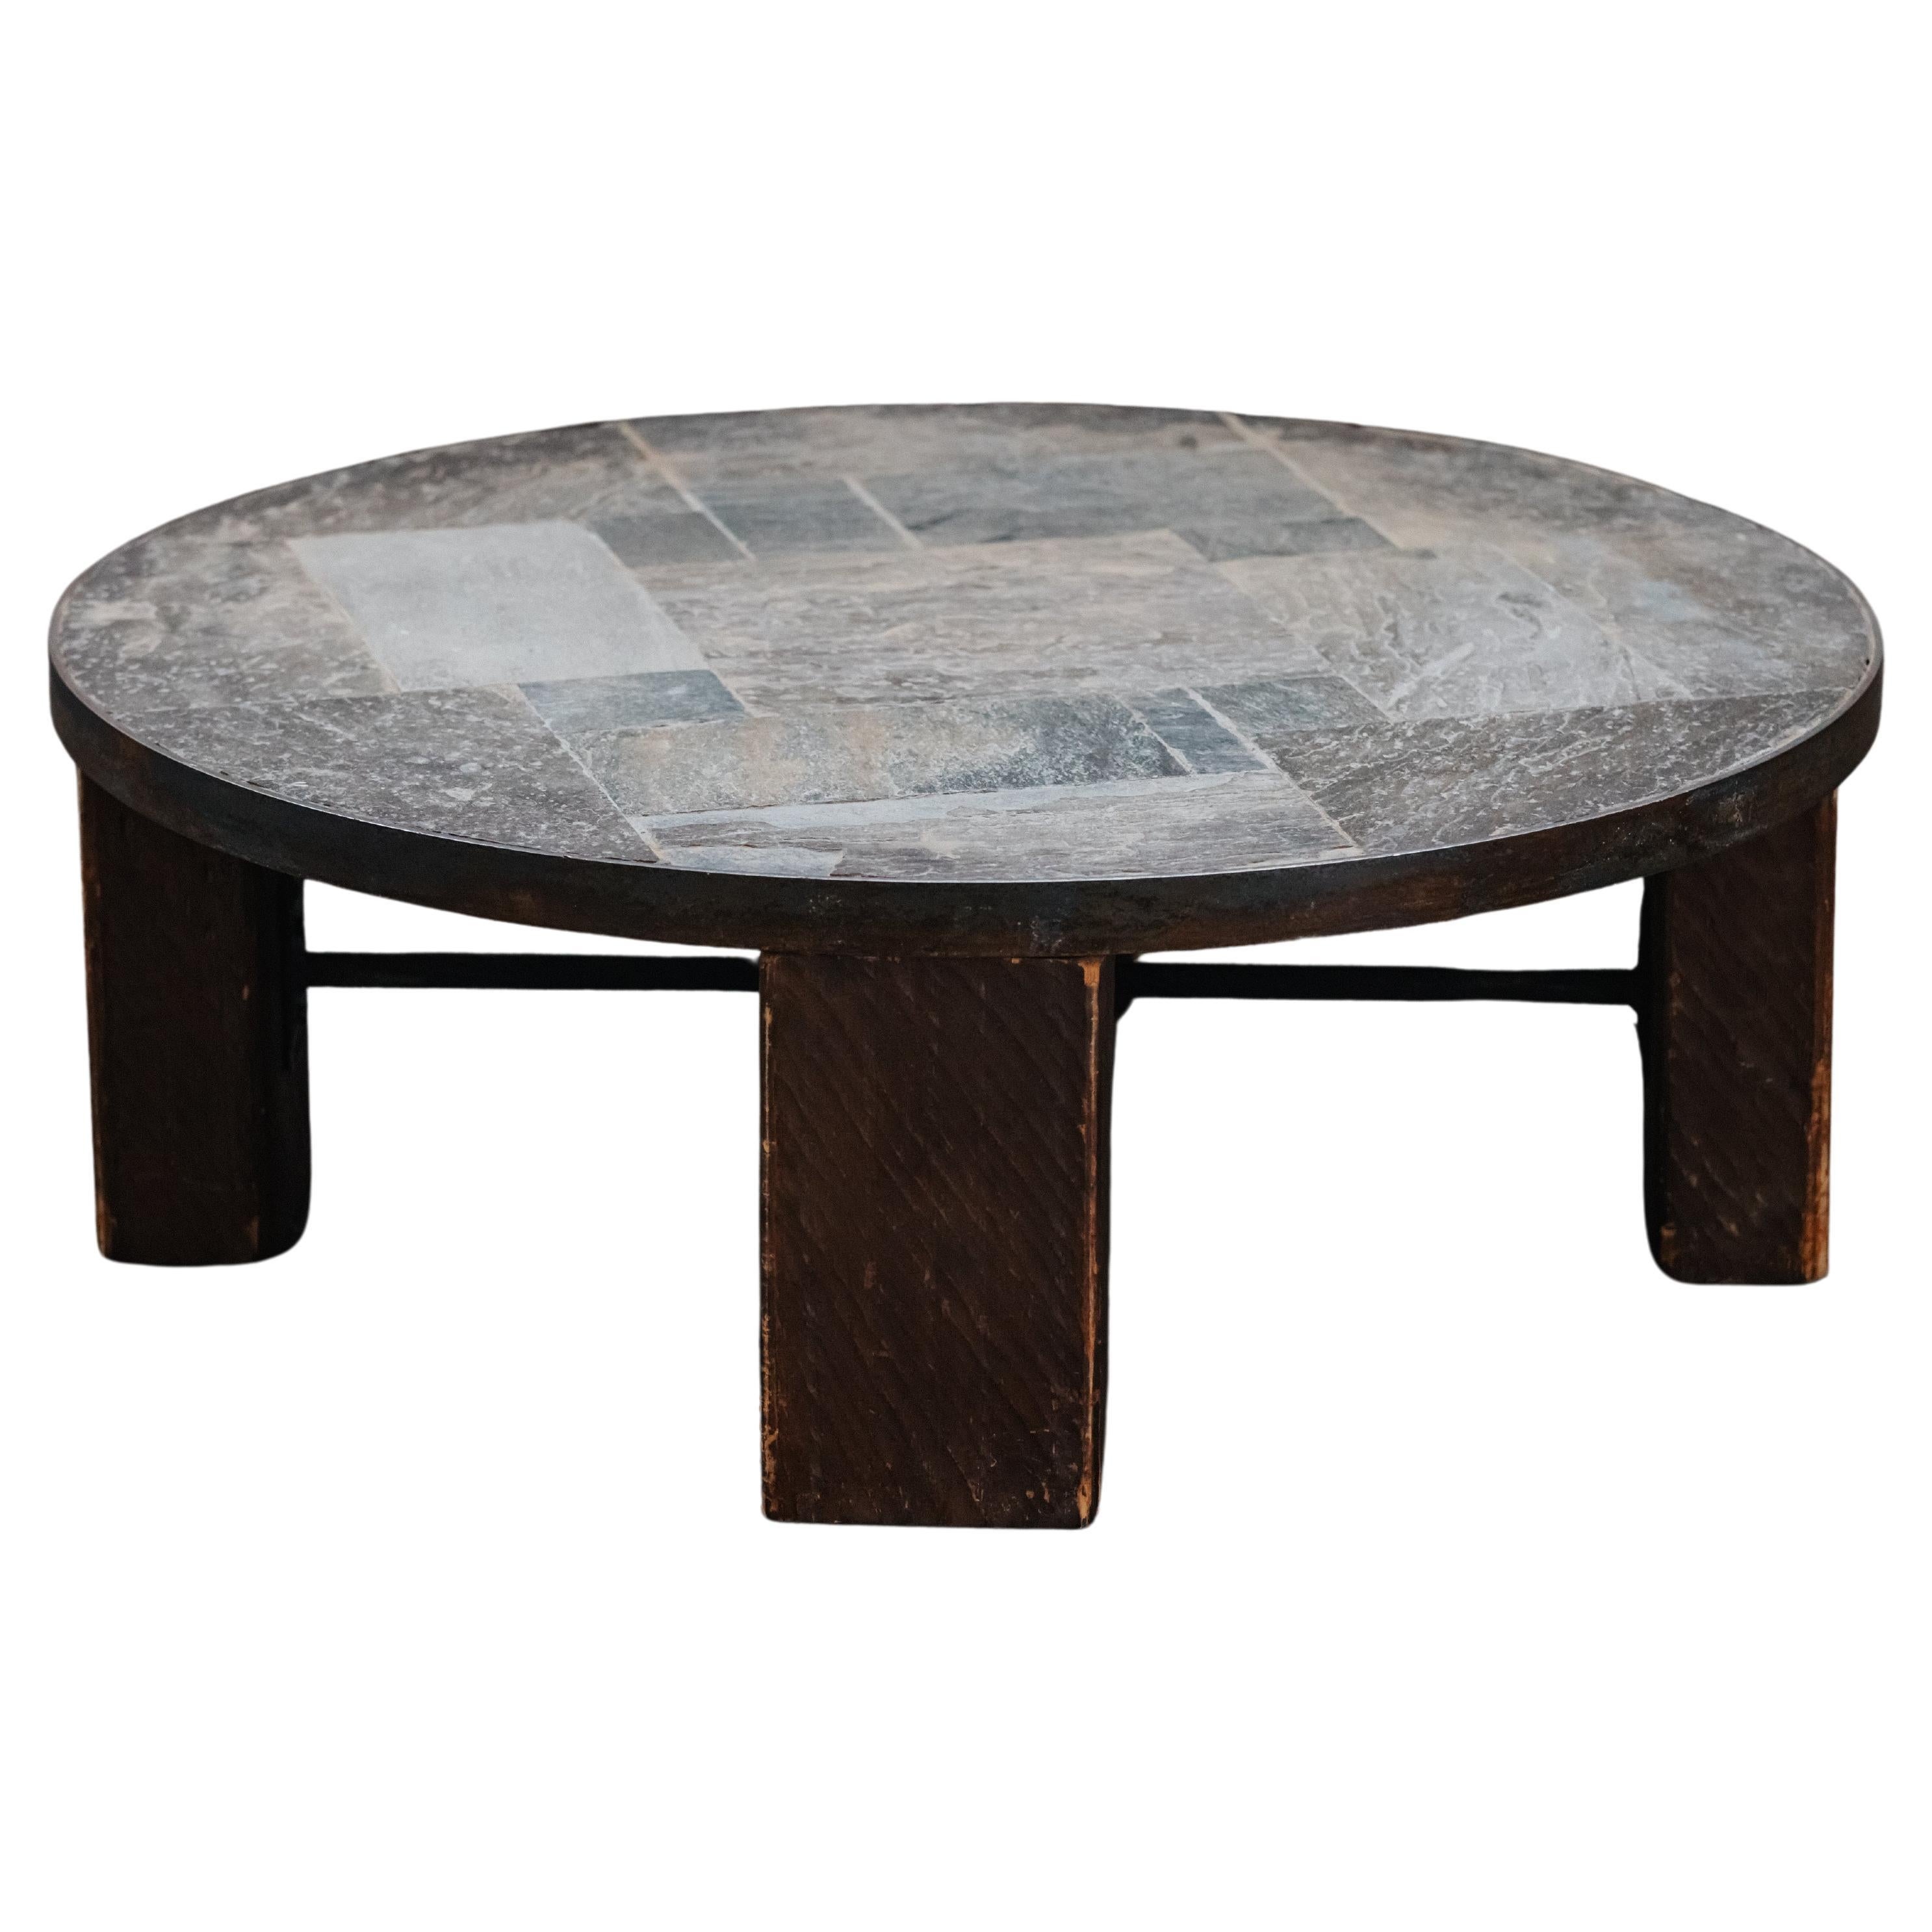 Vintage Stone And Oak Coffee Table From France, Circa 1960